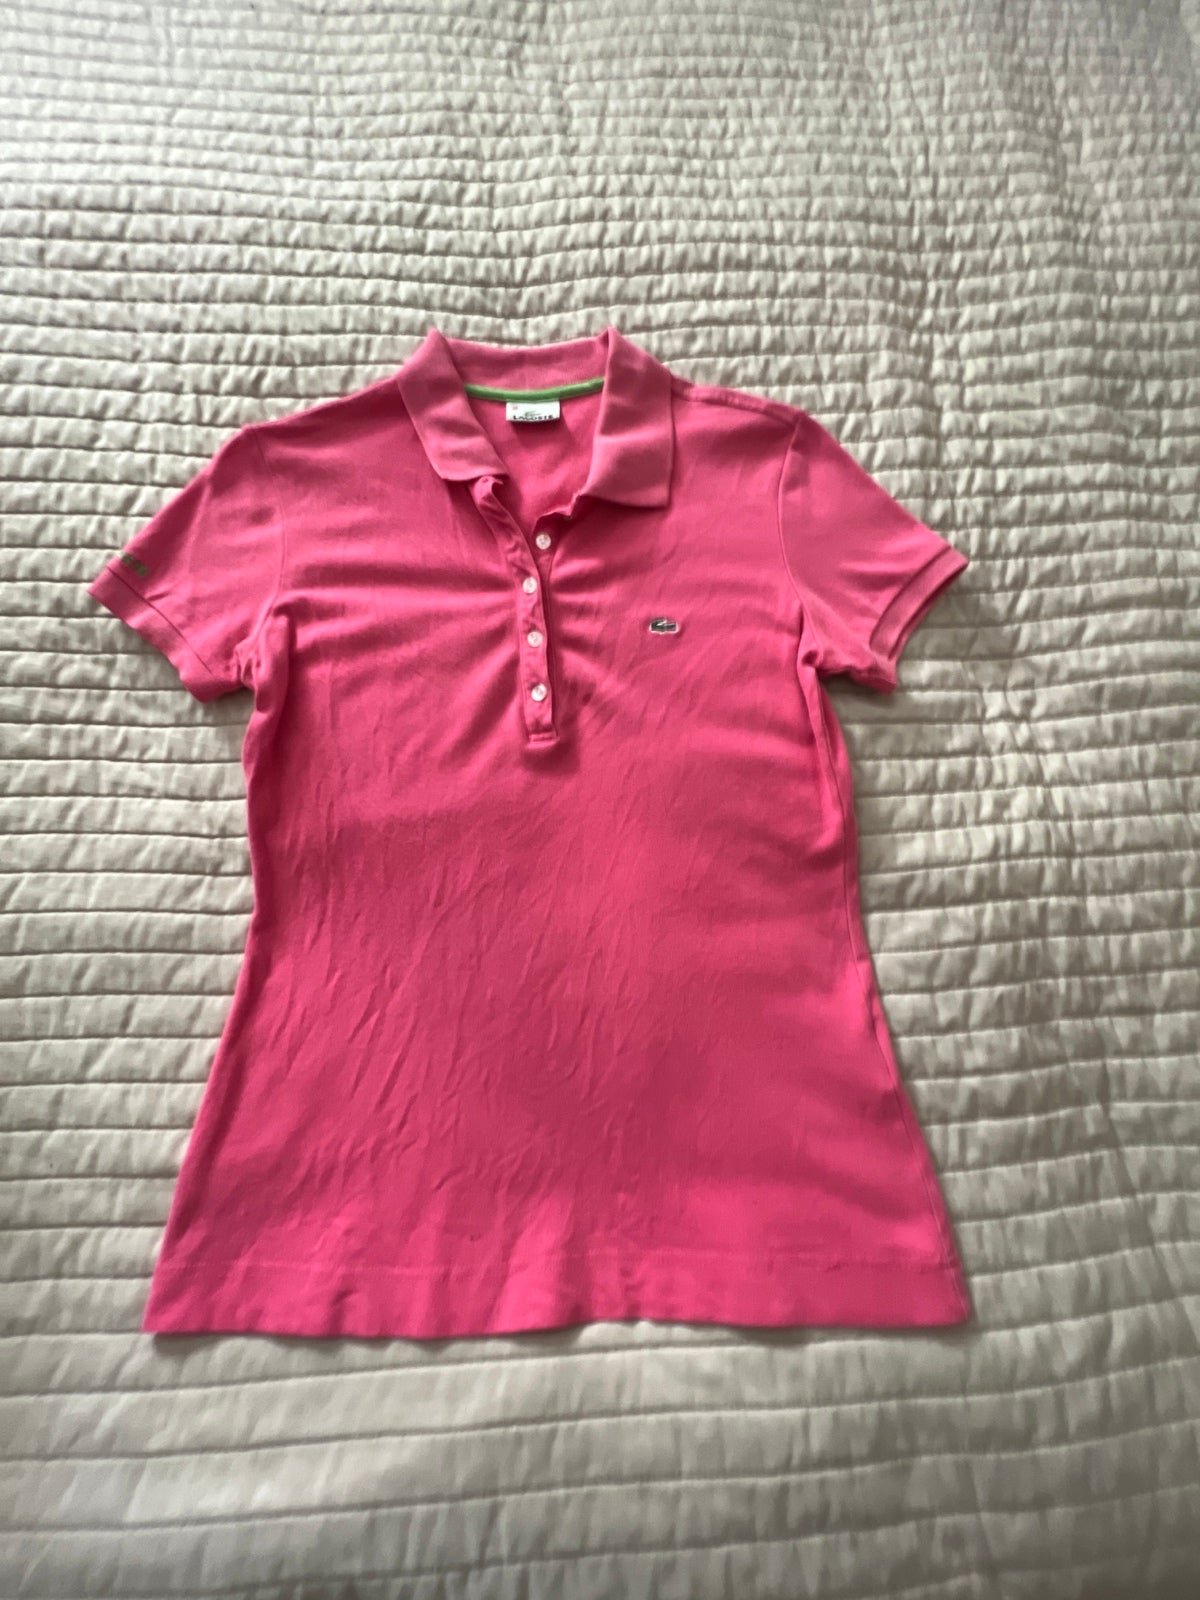 good price Lacoste Pink Short Sleeve polo shirt grXpshh